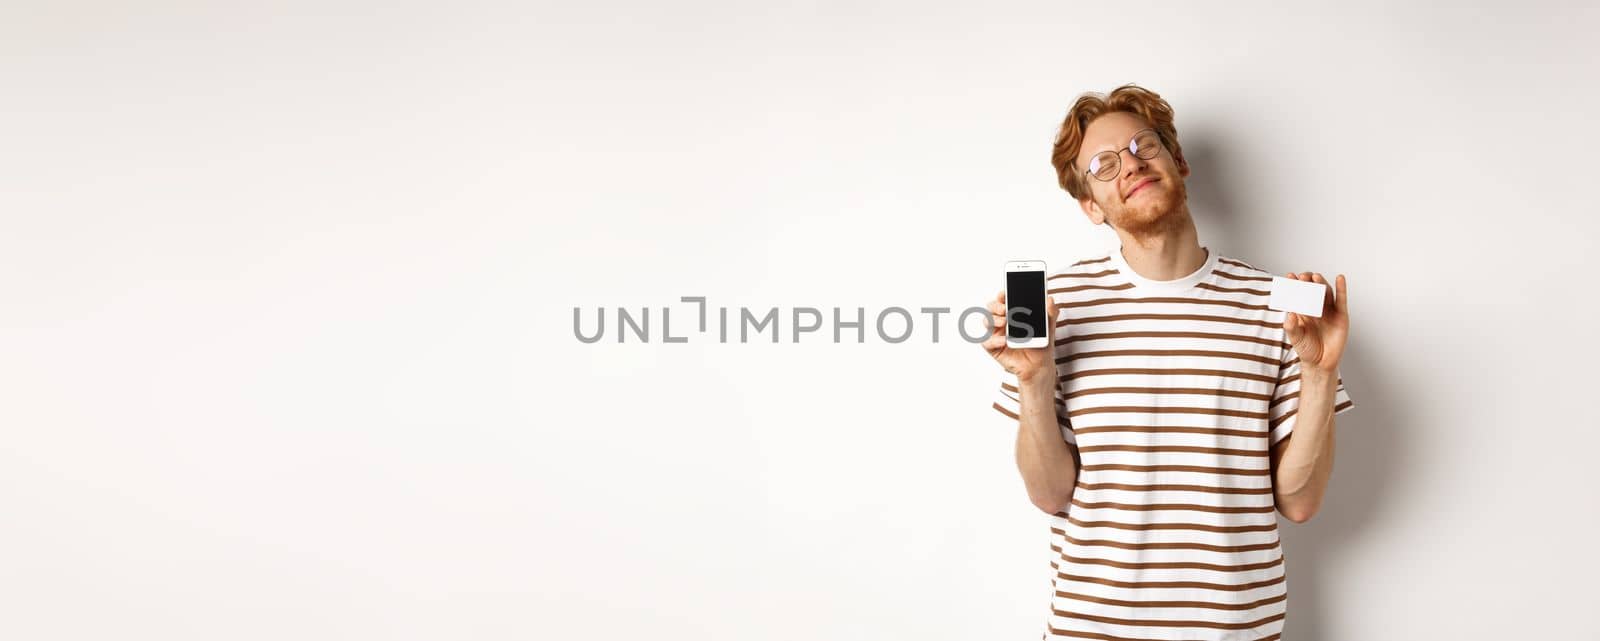 Shopping and finance concept. Pleased young man with red hair smiling from satisfaction, showing smartphone blank screen and credit card, white background.